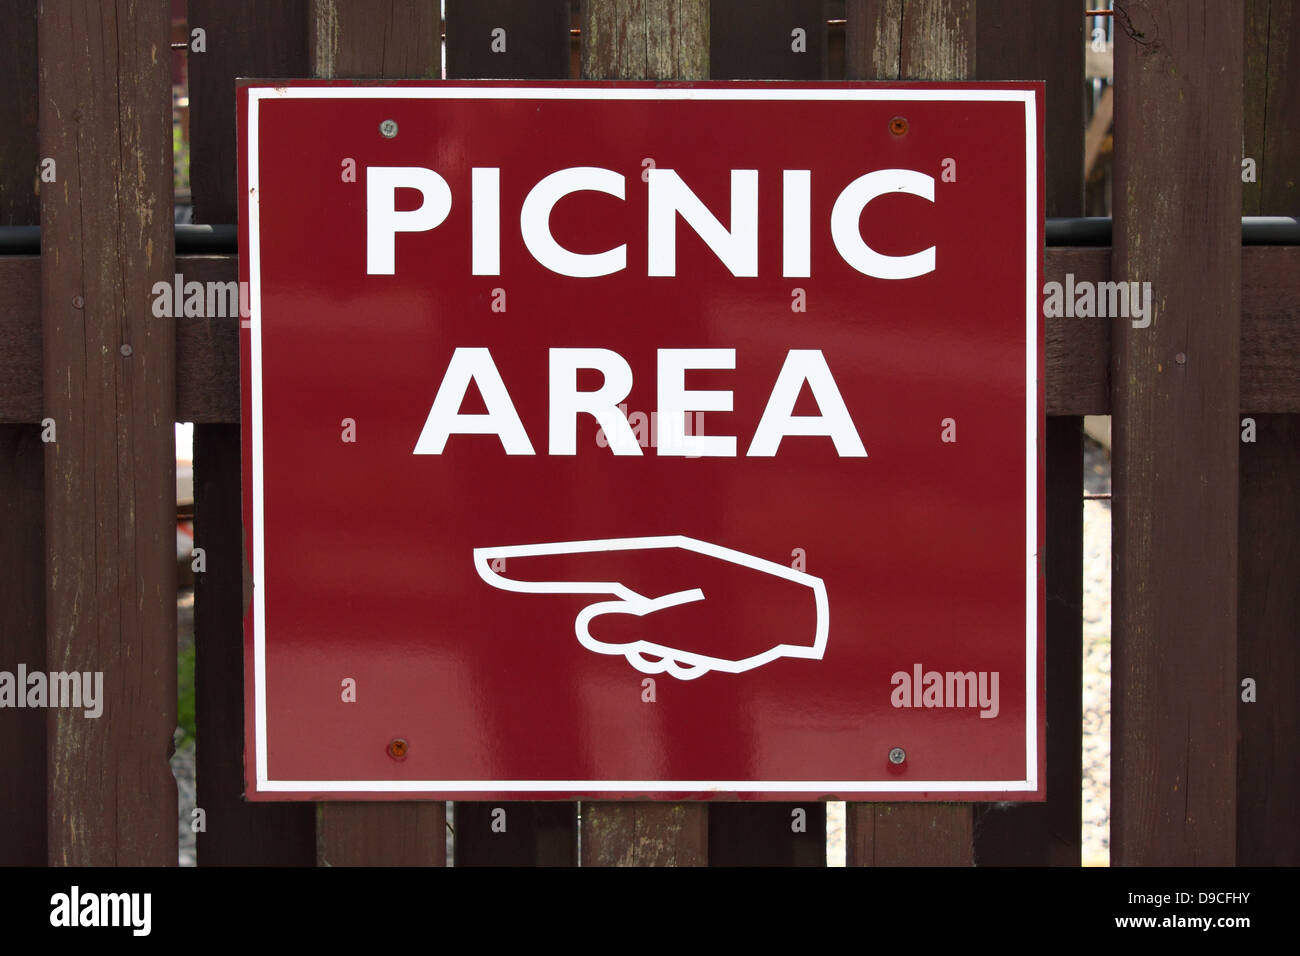 Picnic Area direction sign on fence Stock Photo